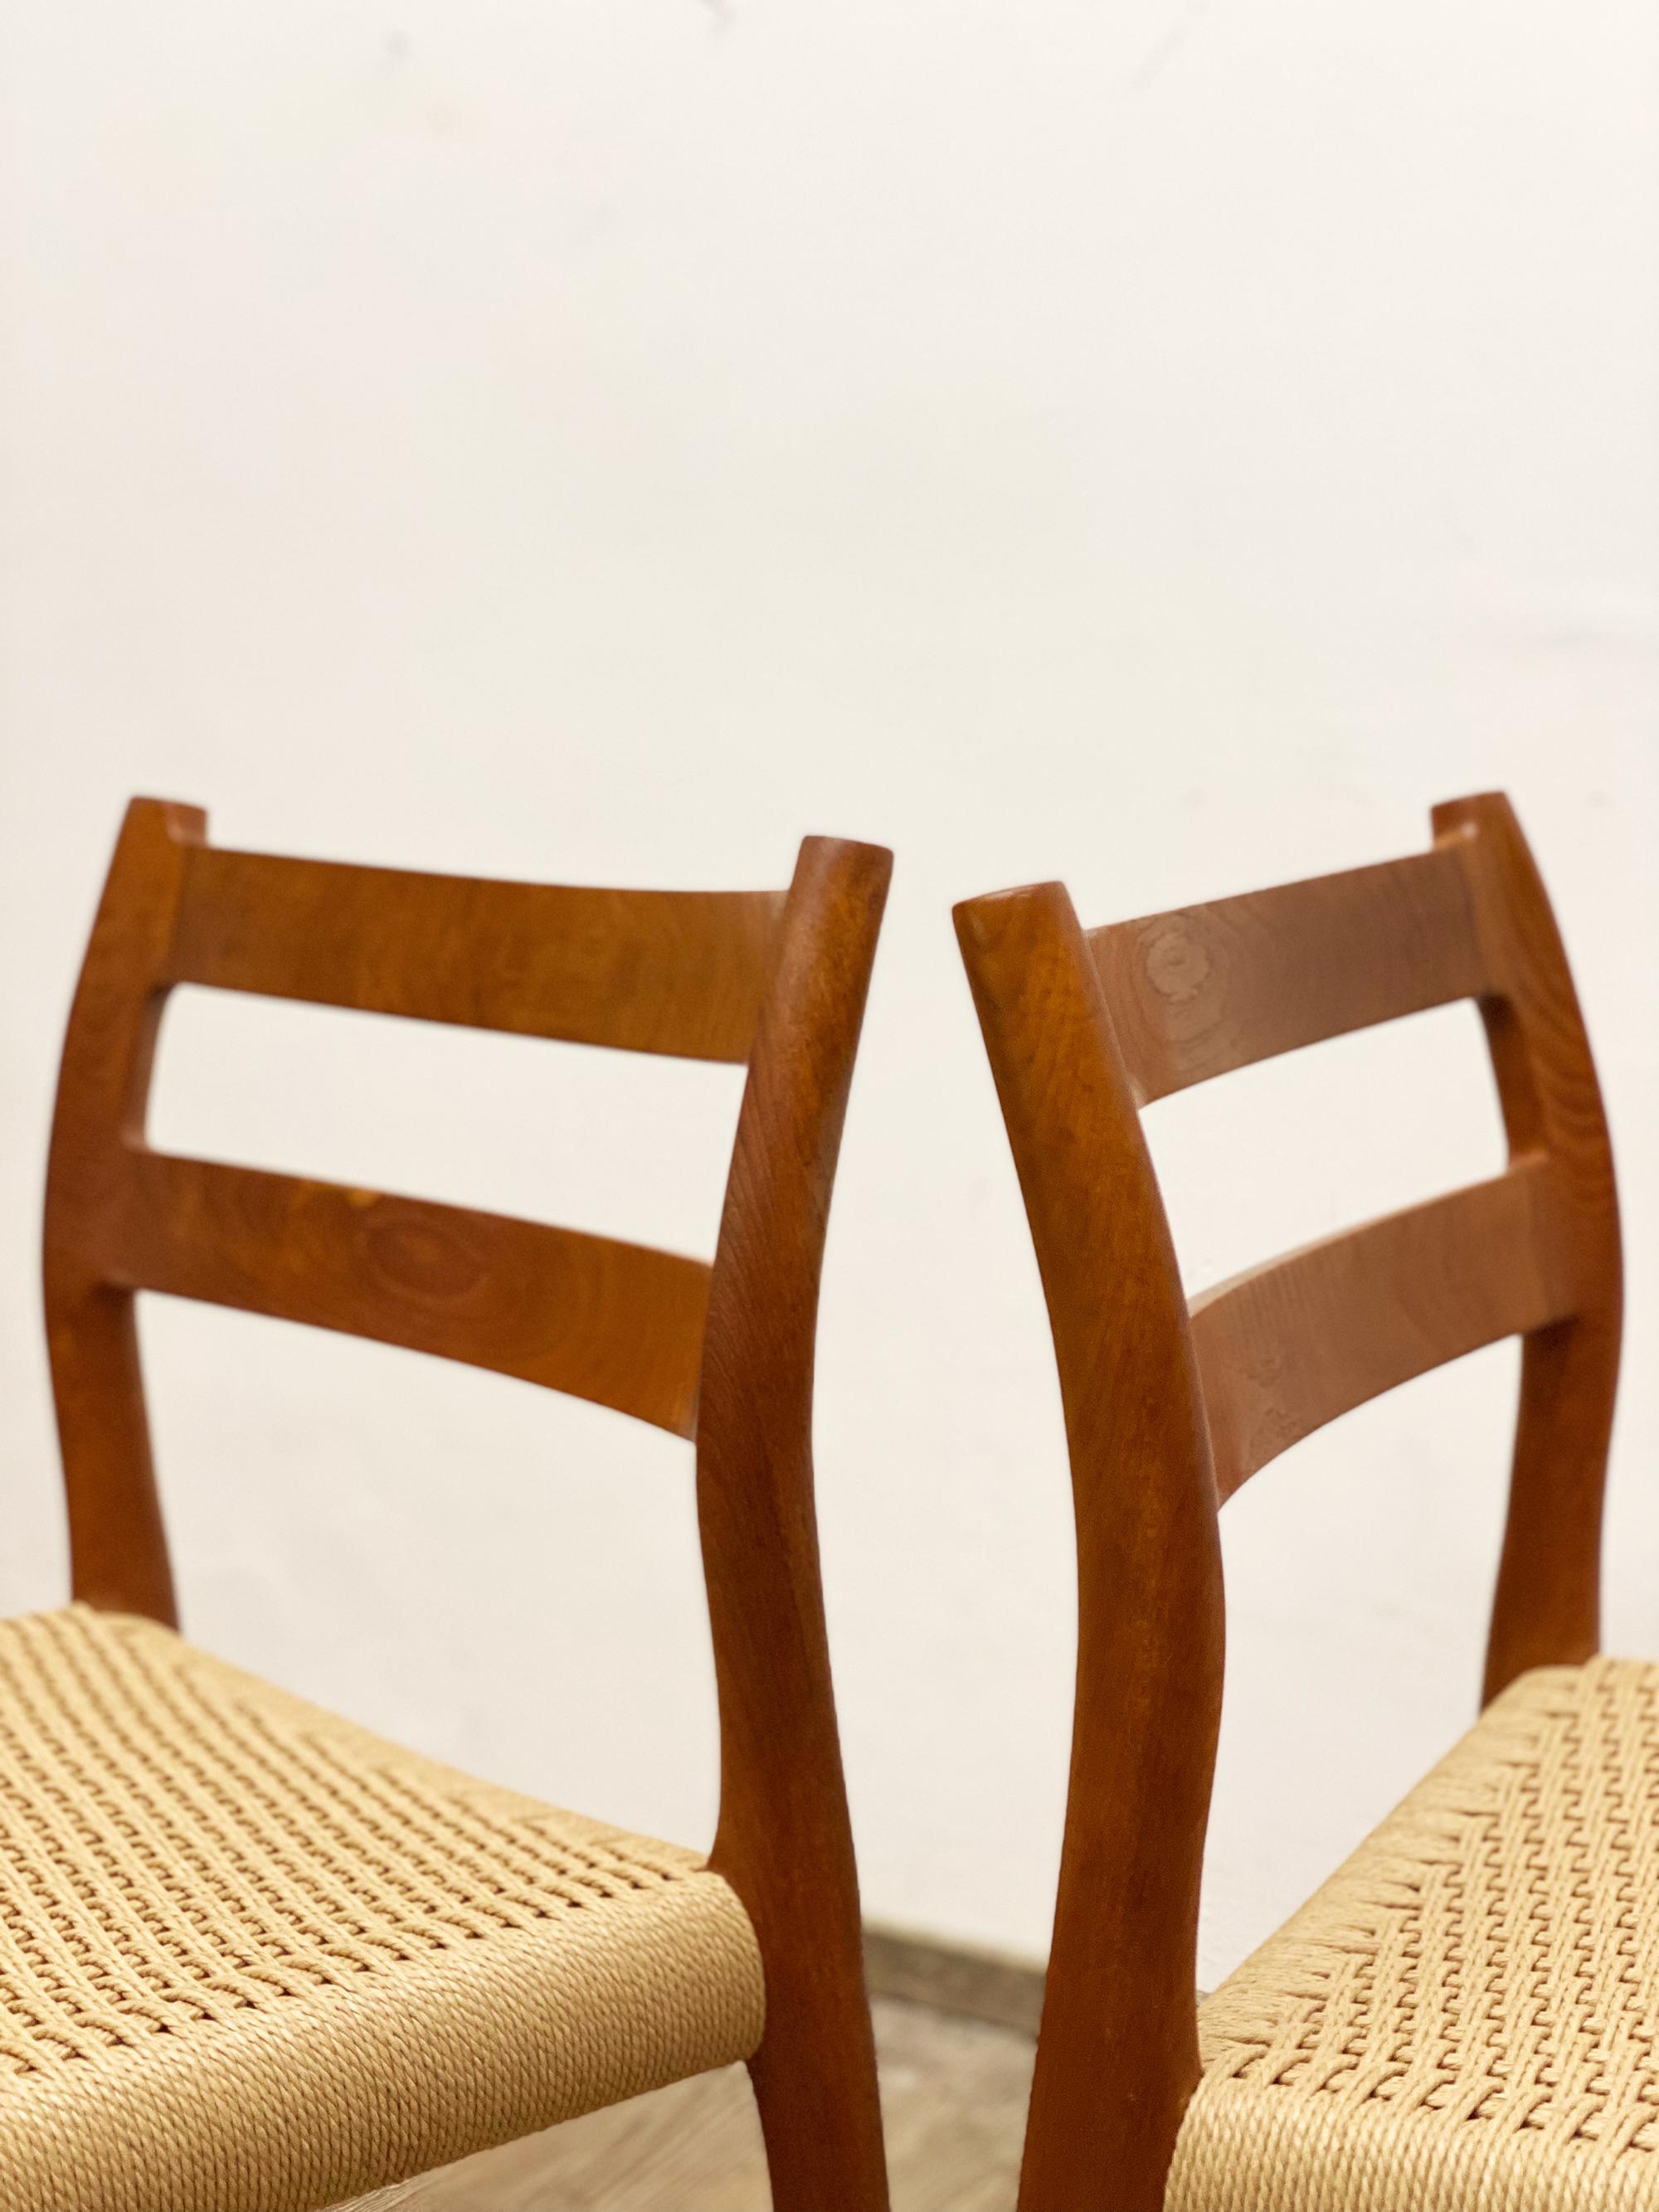 2 Danish Mid-Century Teak Dining Chairs #84 by Niels O. Møller for J. L. Moller For Sale 3